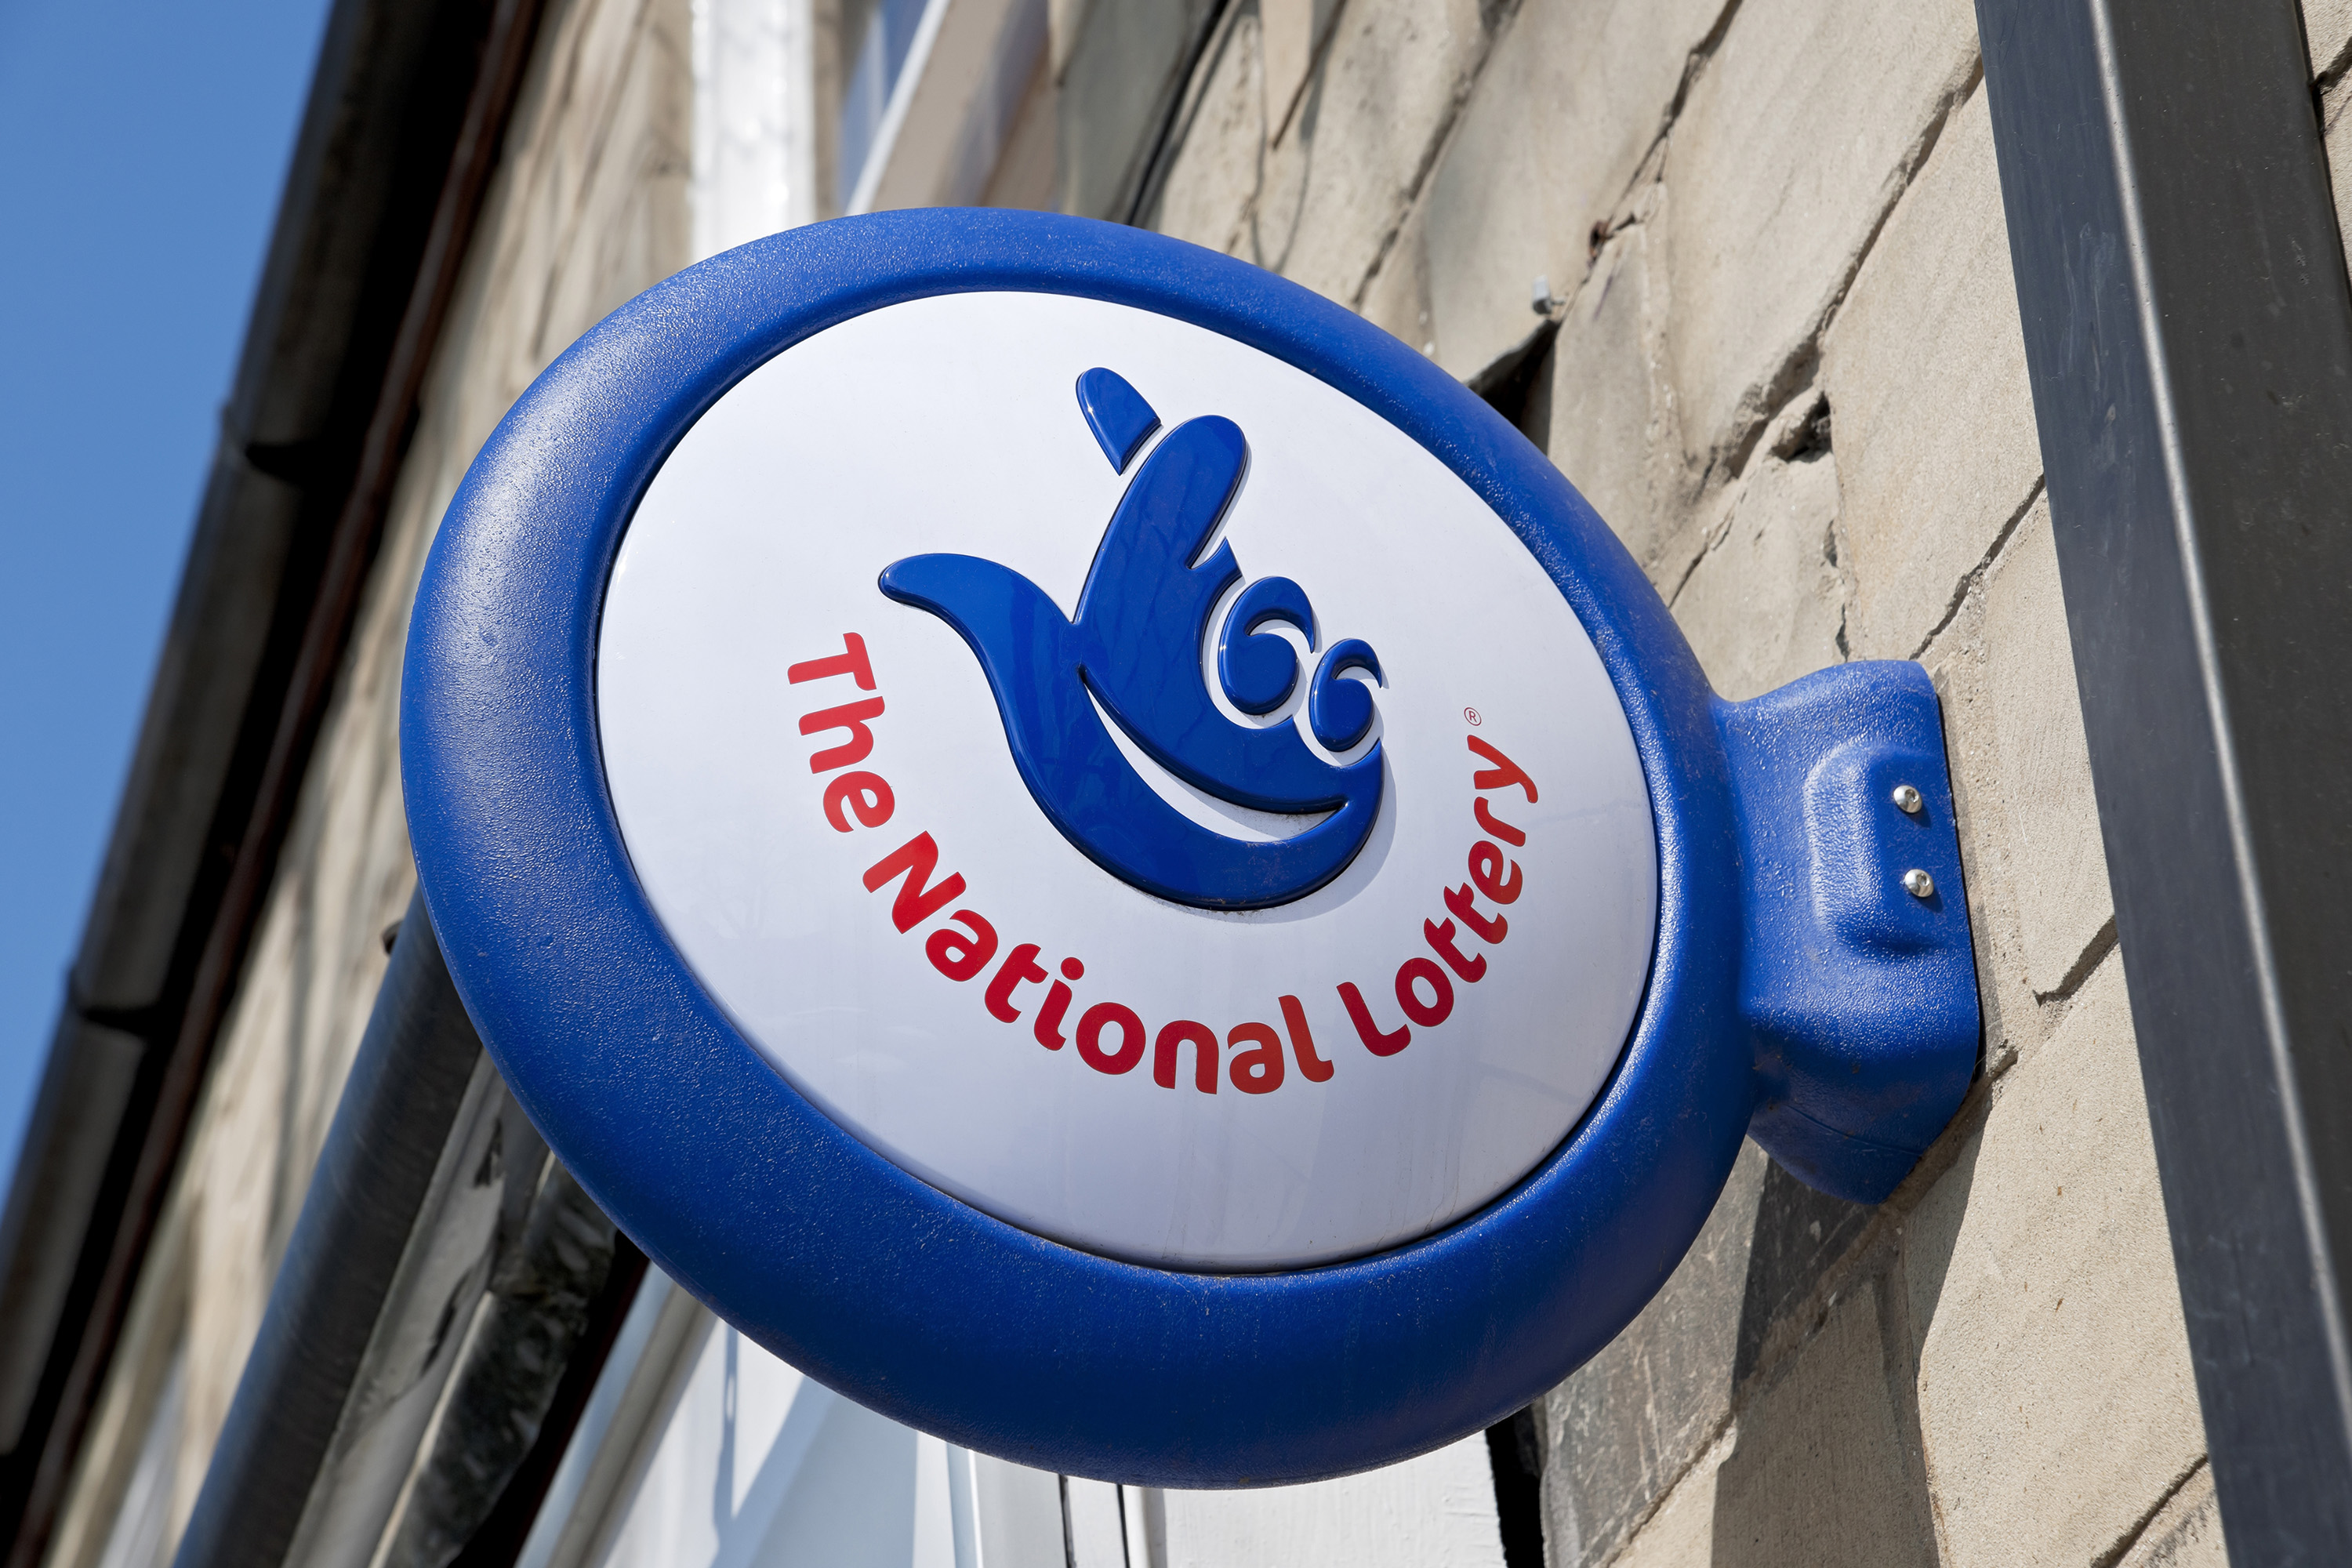 The National Lottery sign on a shop.&nbsp;